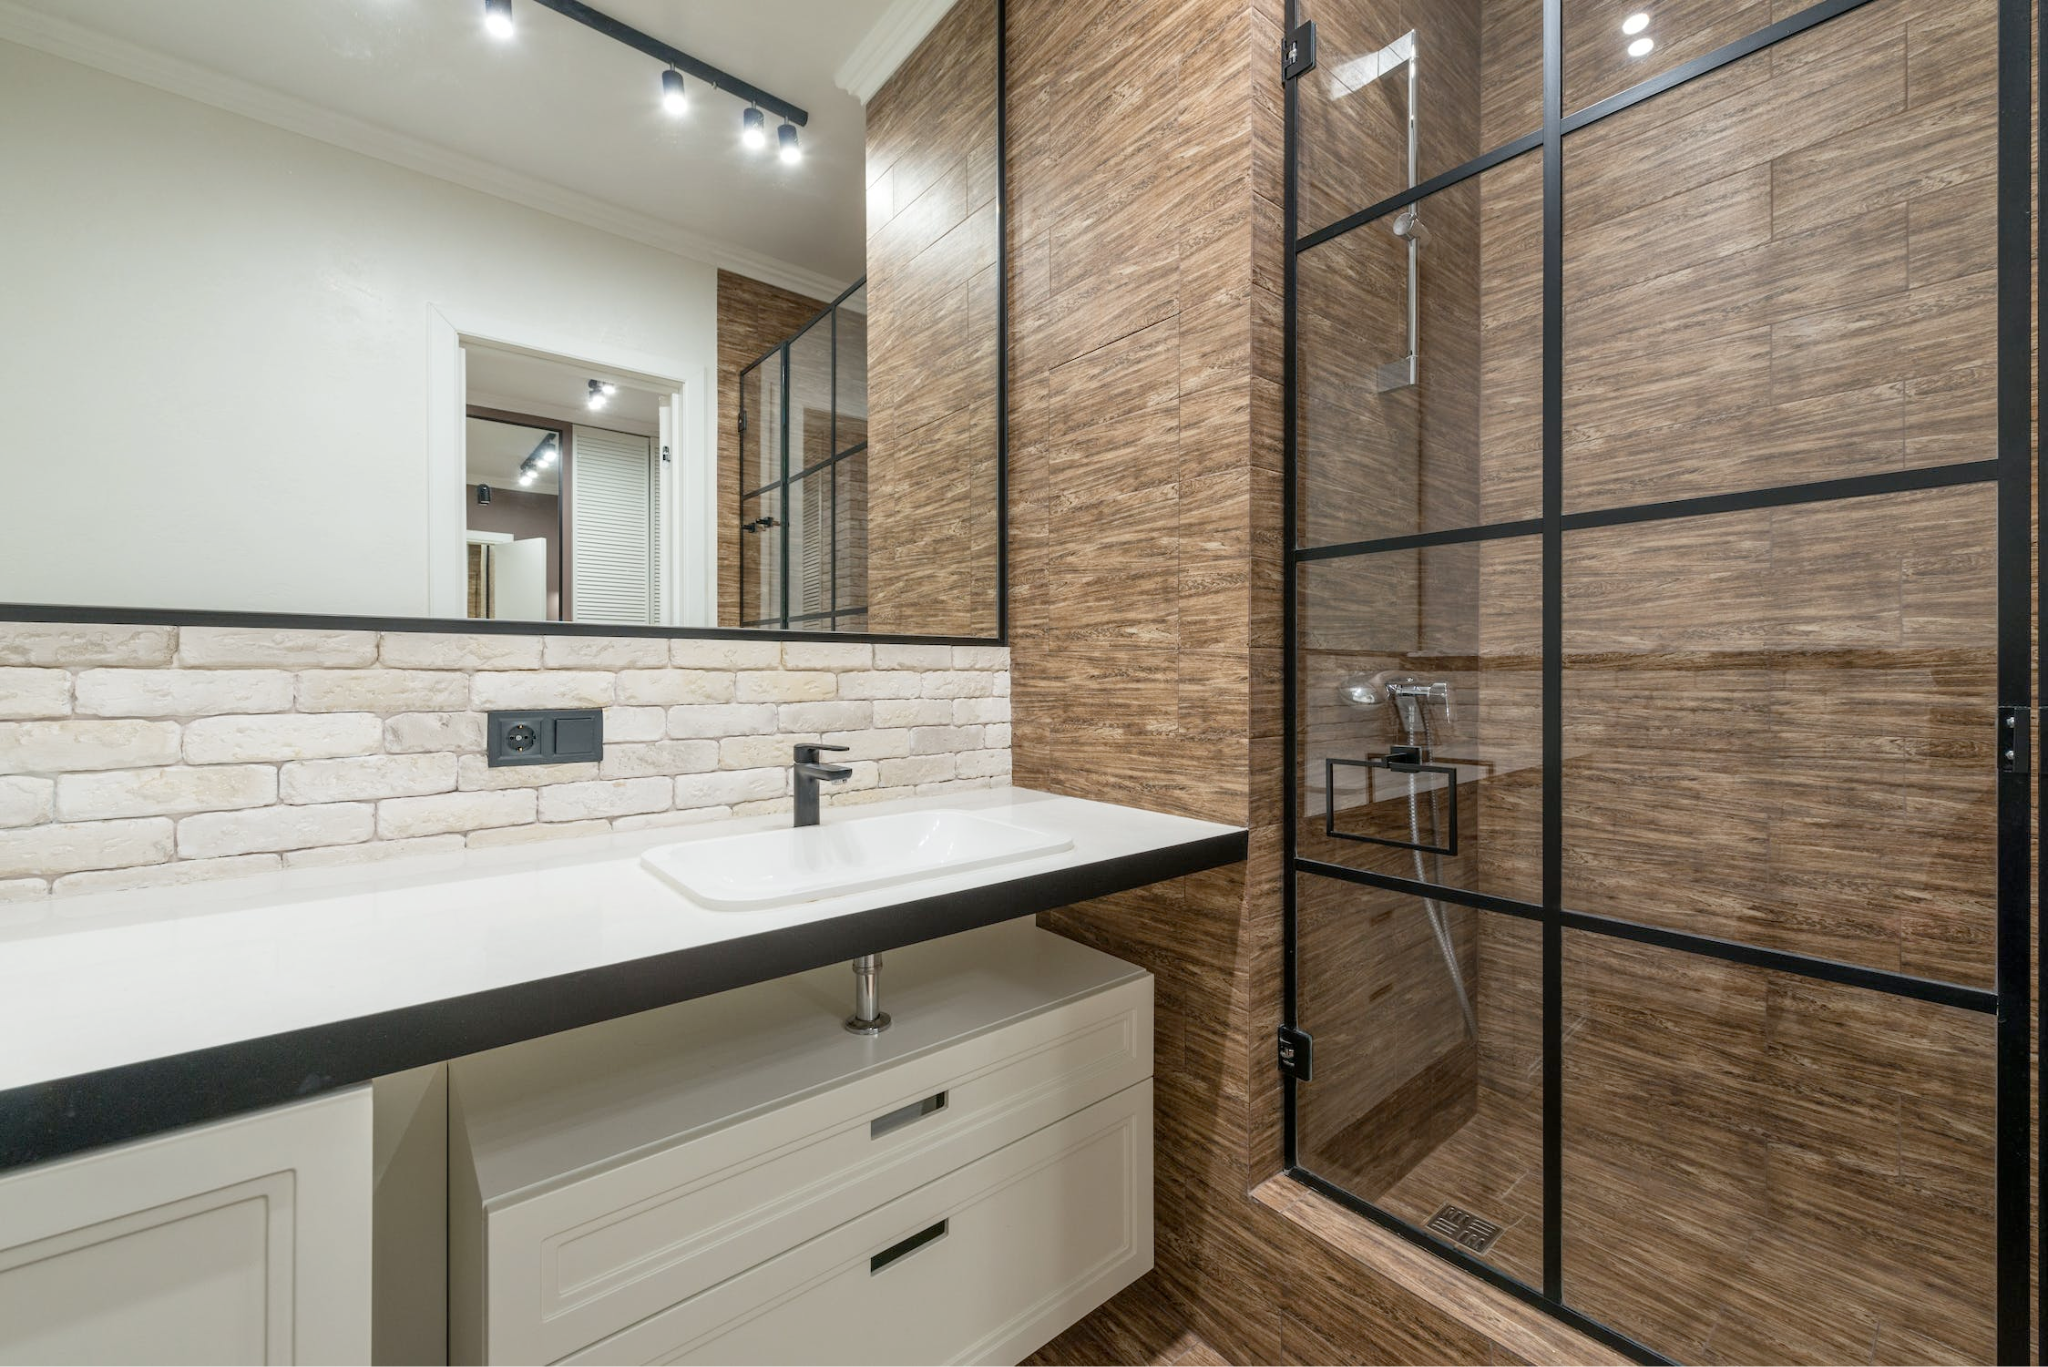 An image of a modern bathroom with sliding shower doors